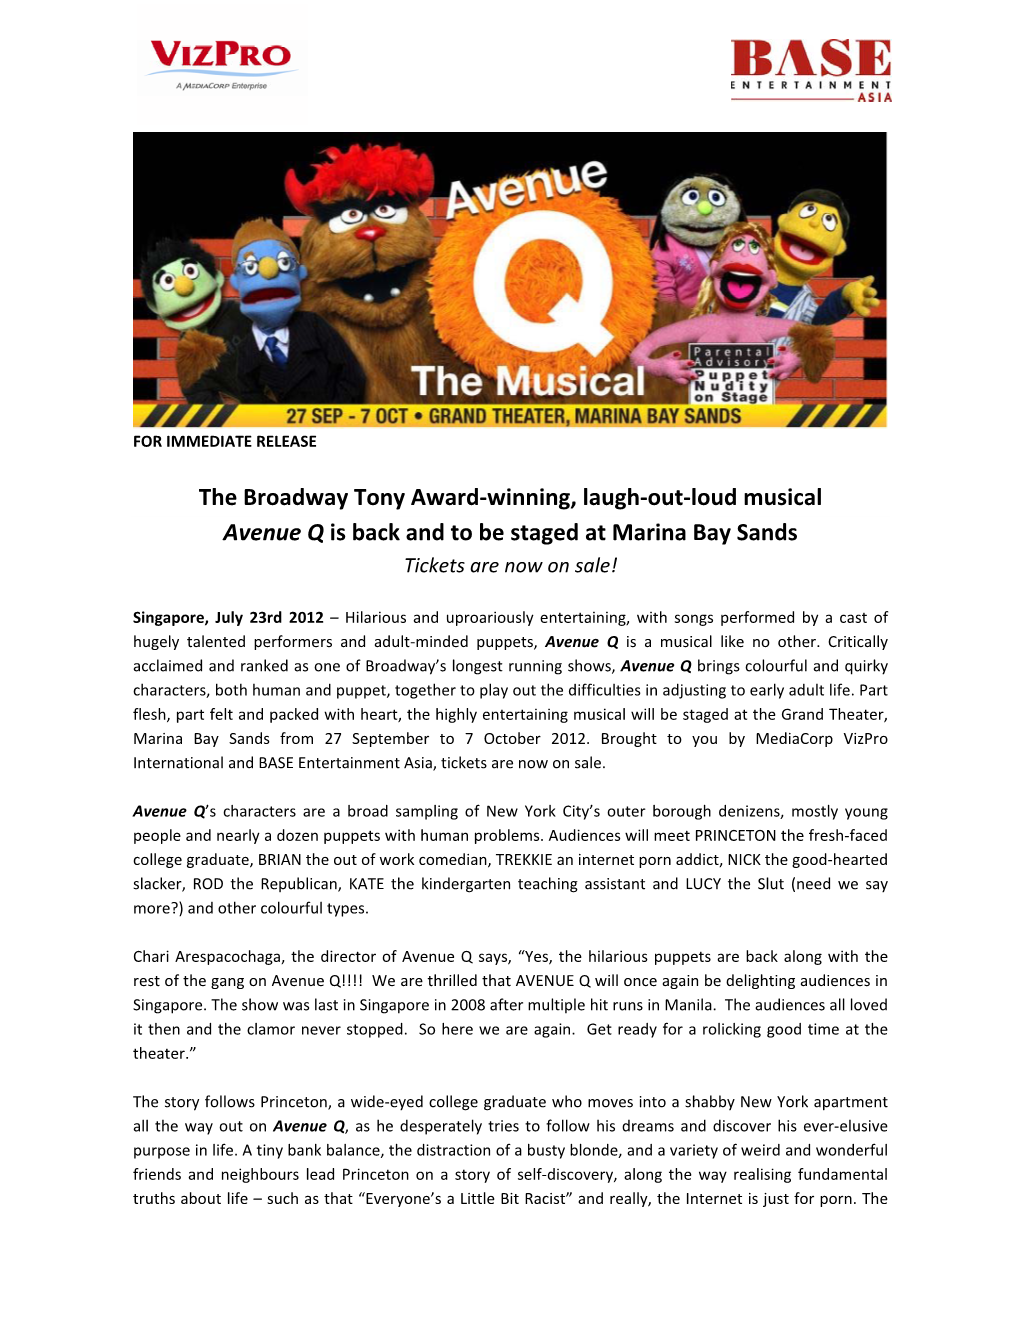 The Broadway Tony Award-Winning, Laugh-Out-Loud Musical Avenue Q Is Back and to Be Staged at Marina Bay Sands